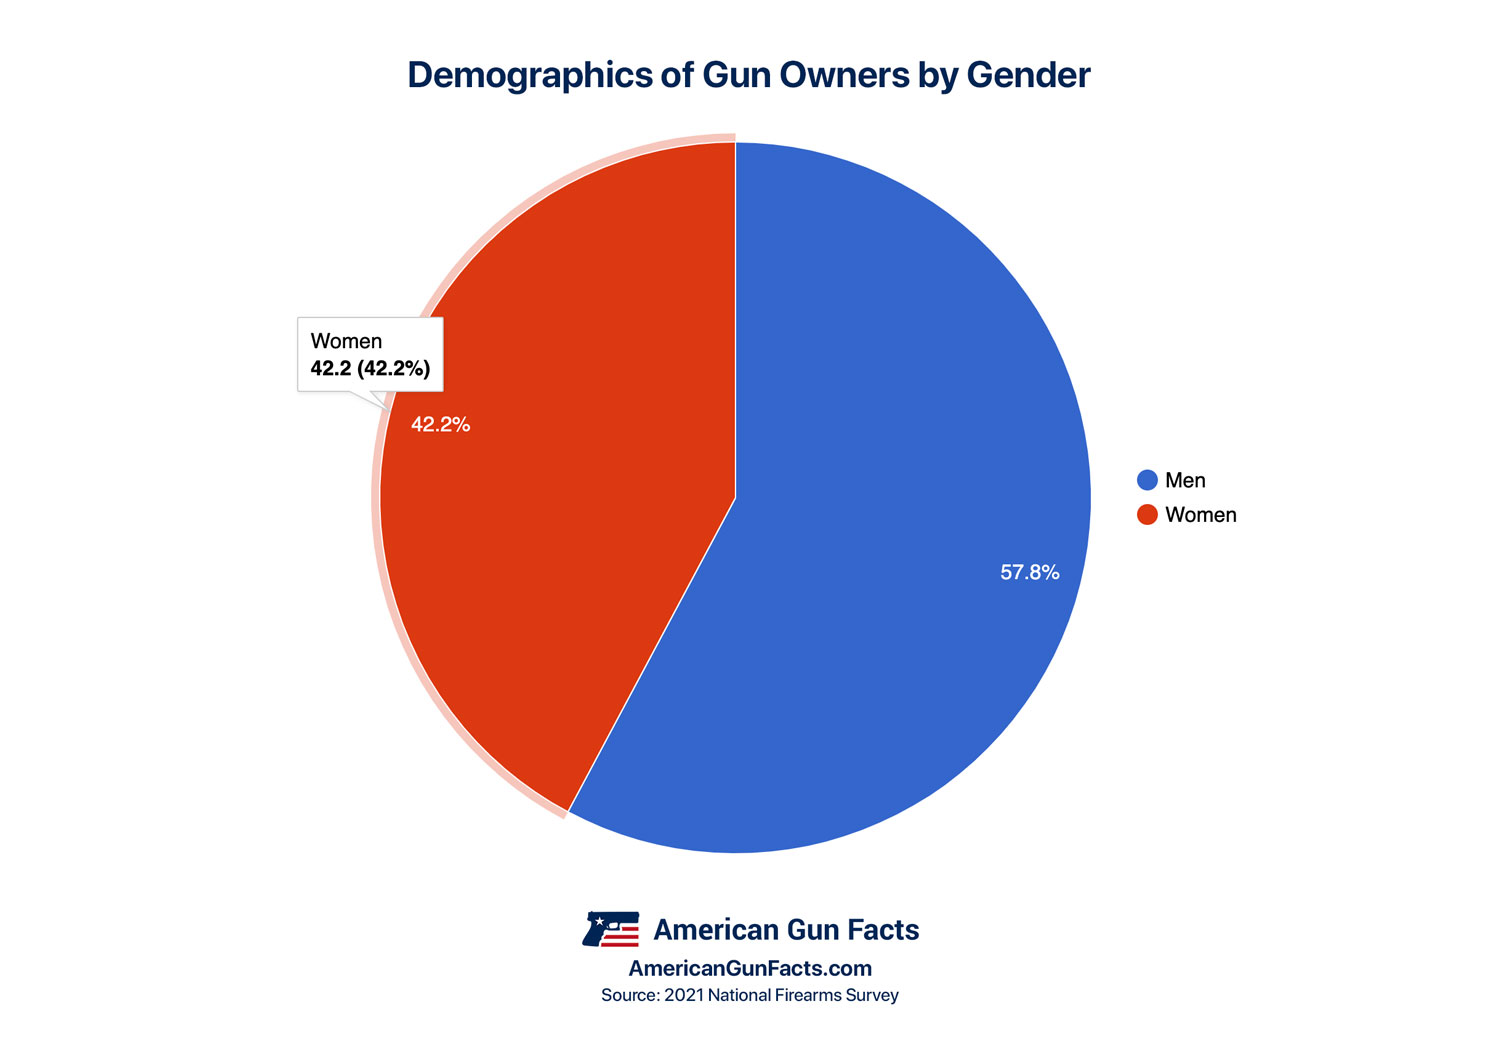 Demographics of Gun Owners in the US by gender